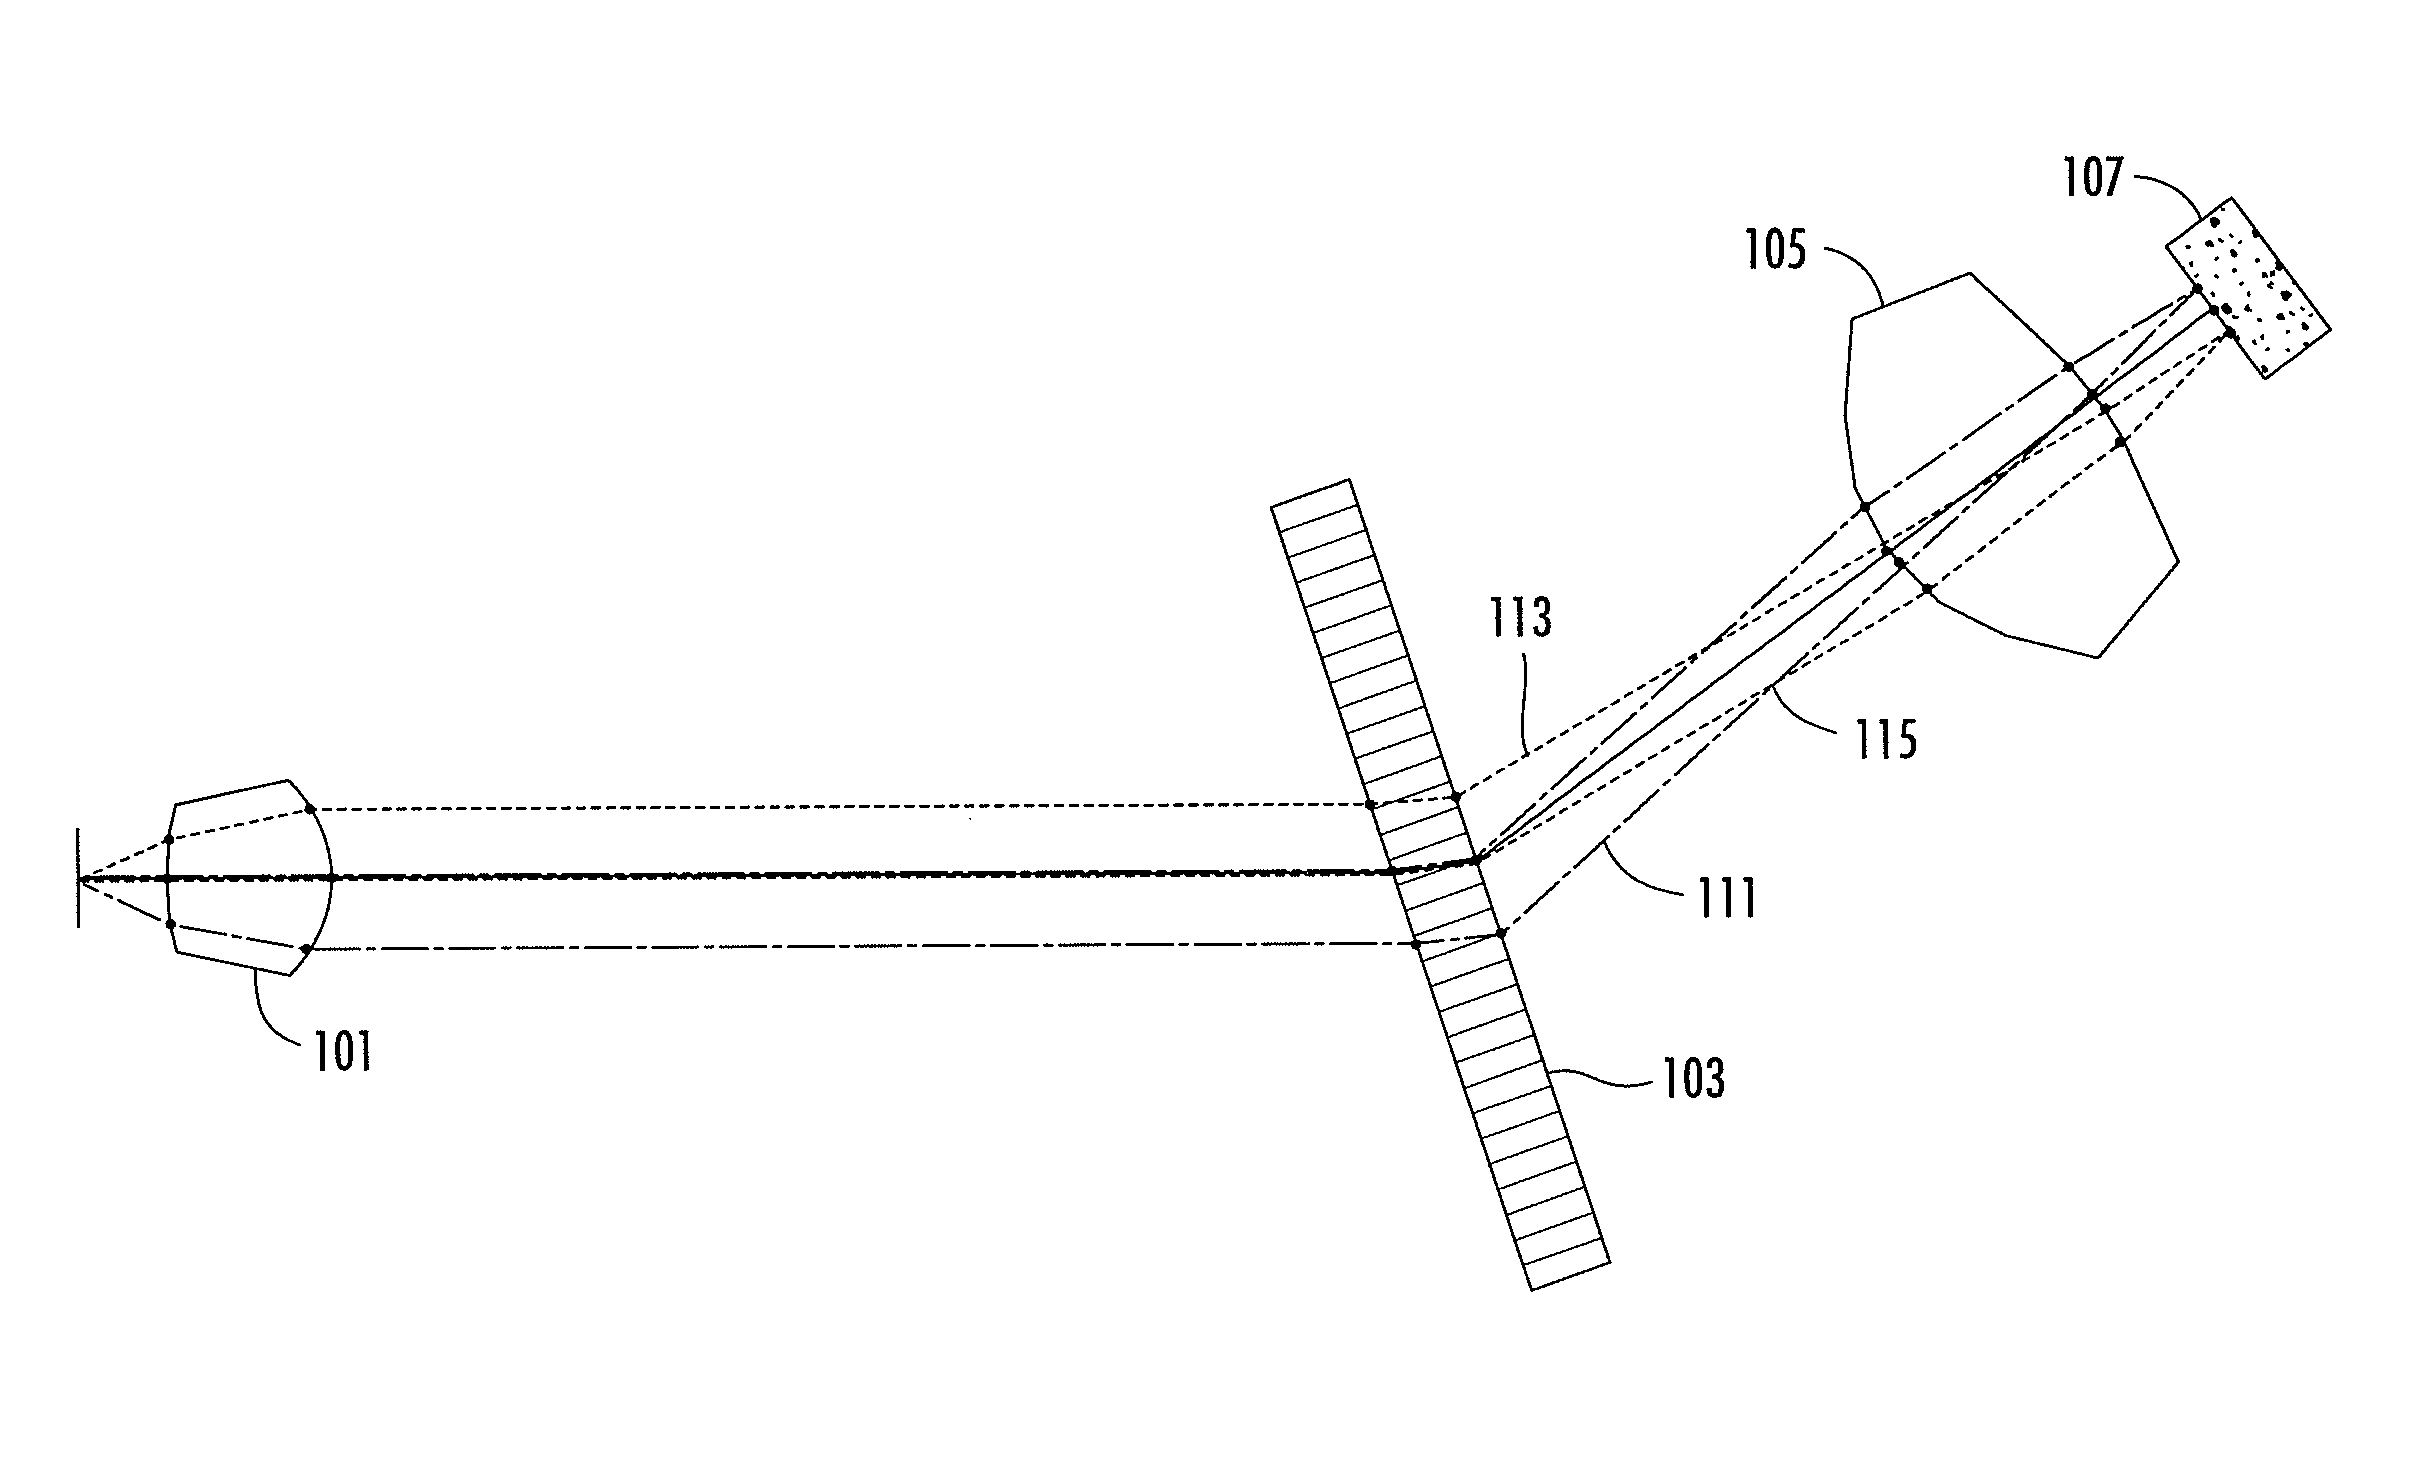 Frequency comb source with large comb spacing